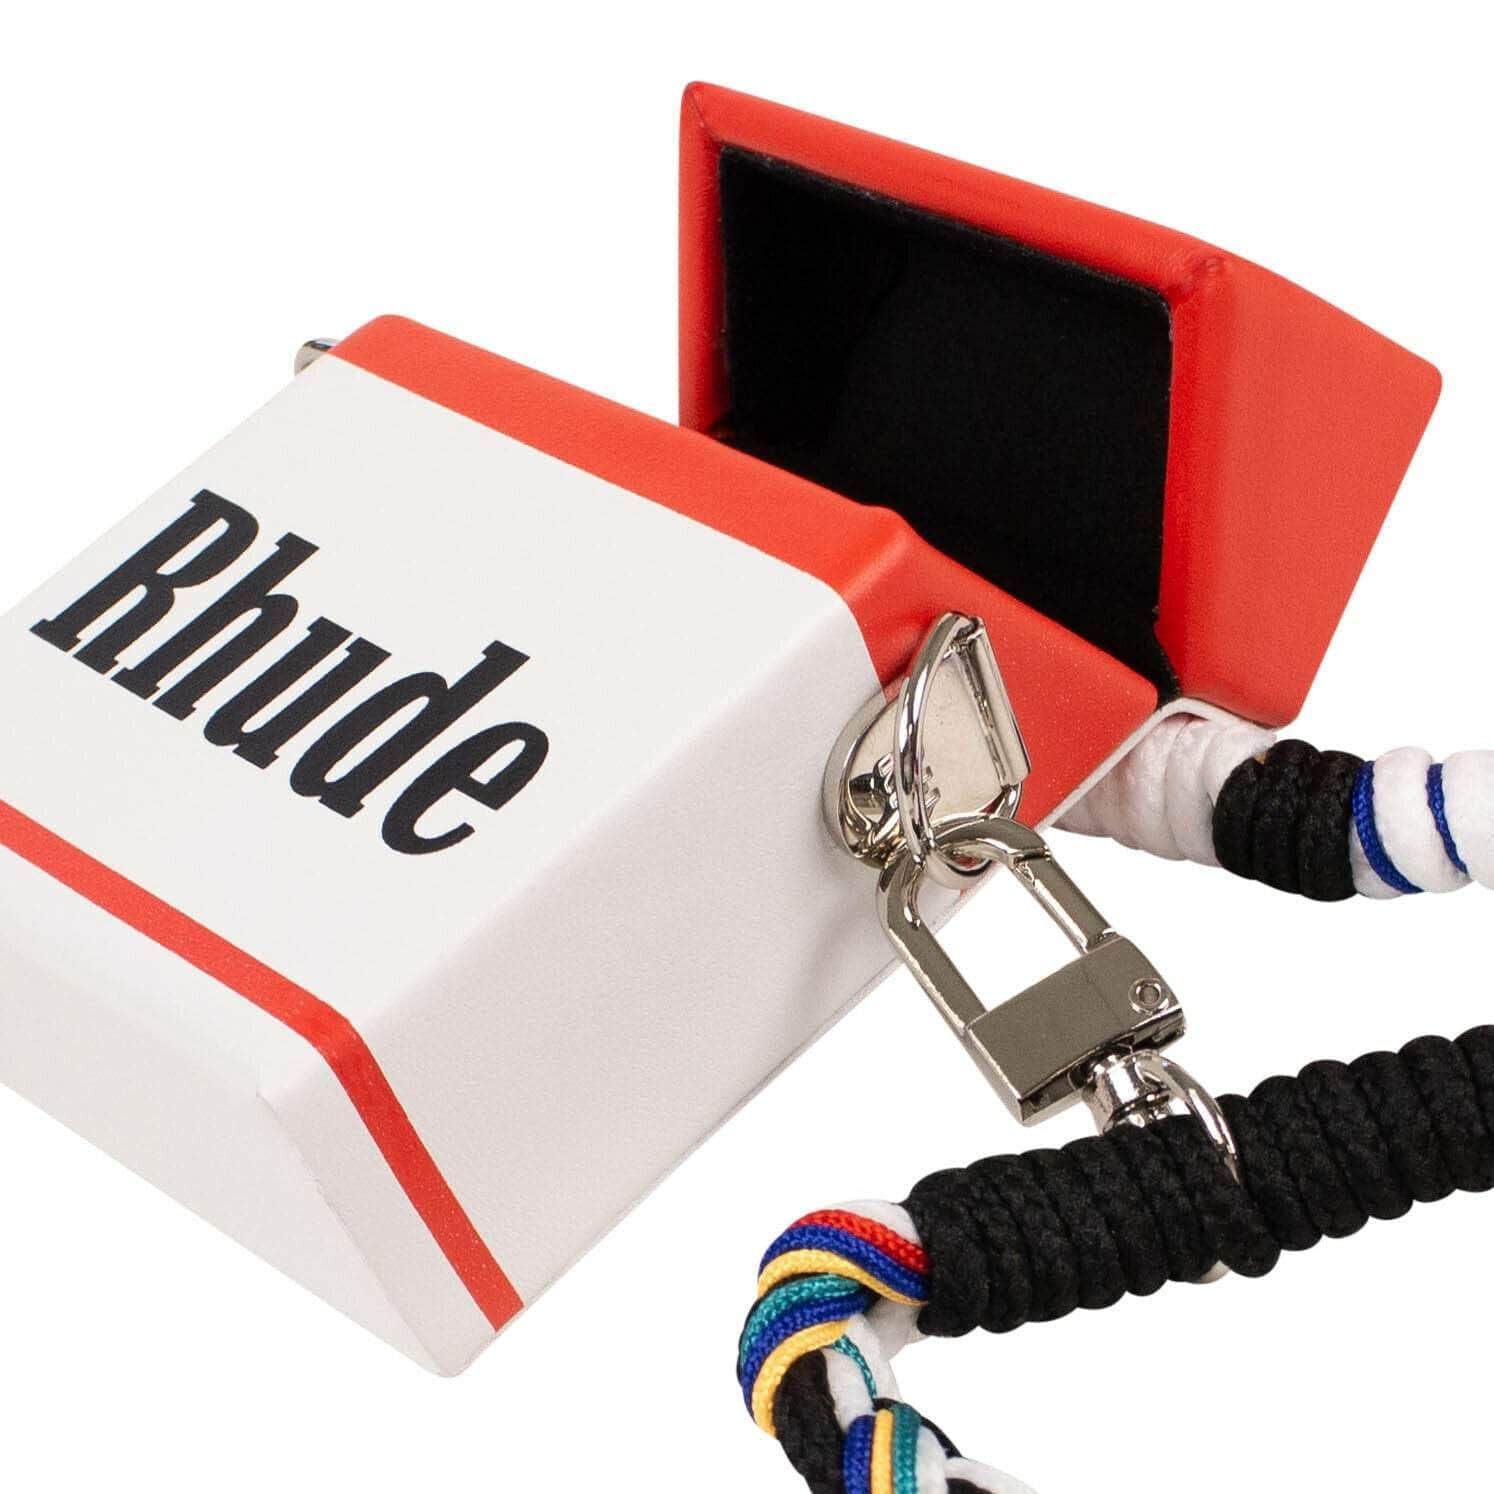 Rhude 500-750, channelenable-all, chicmi, couponcollection, gender-mens, main-handbags, mens-messenger-bags, mens-shoes, rhude, size-os OS Red And White Small Cigarette Box Crossbody Bag 95-RHD-3011/OS 95-RHD-3011/OS